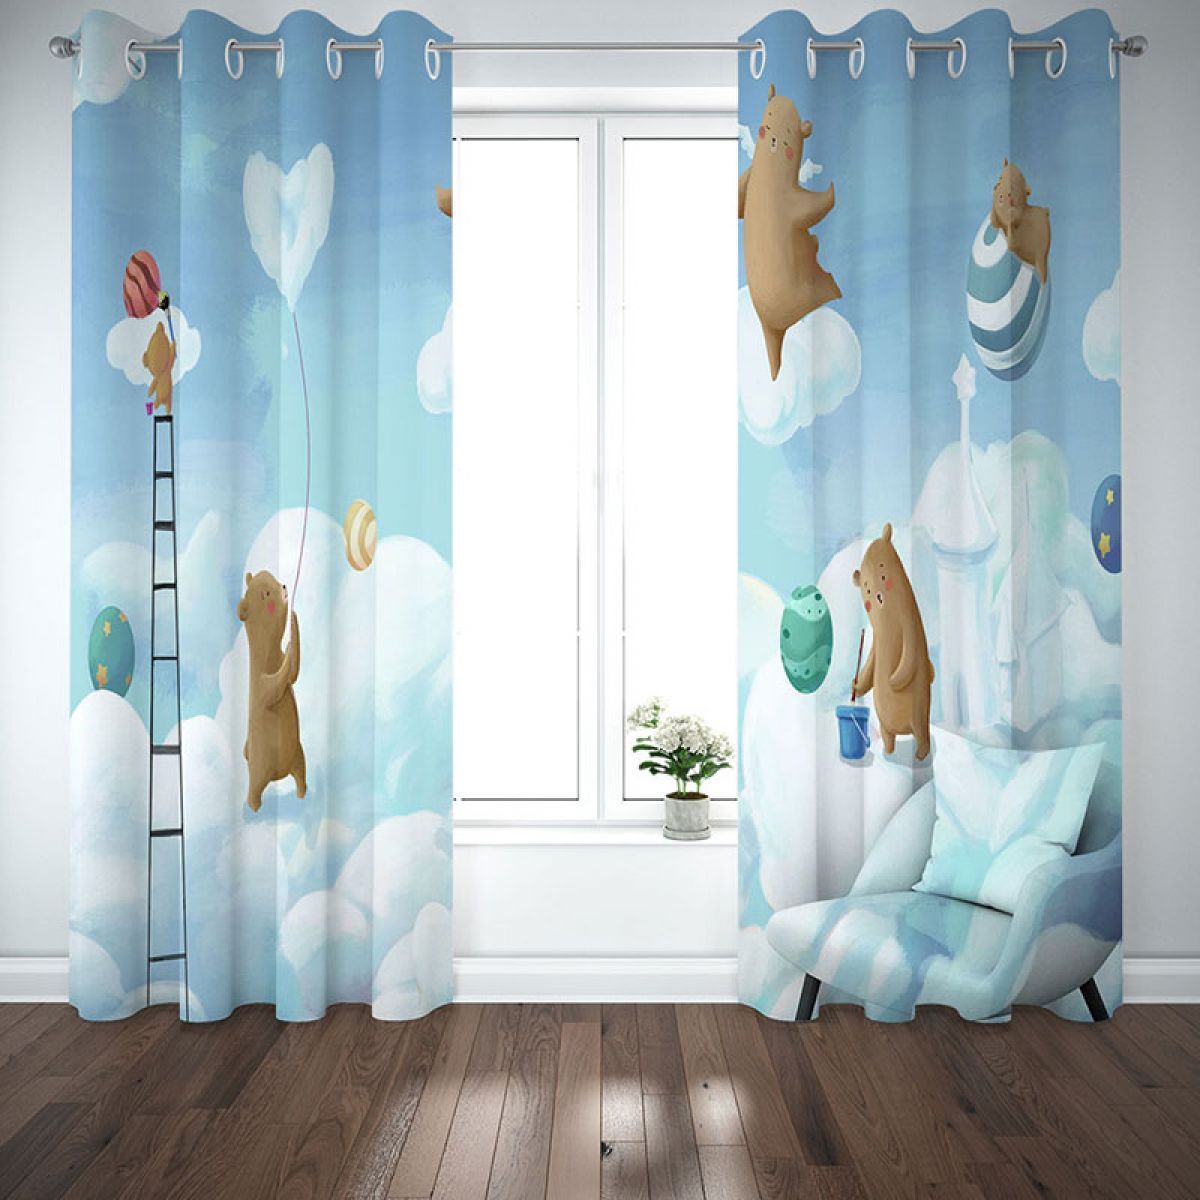 3d Bear On The Clouds Printed Window Curtain Home Decor